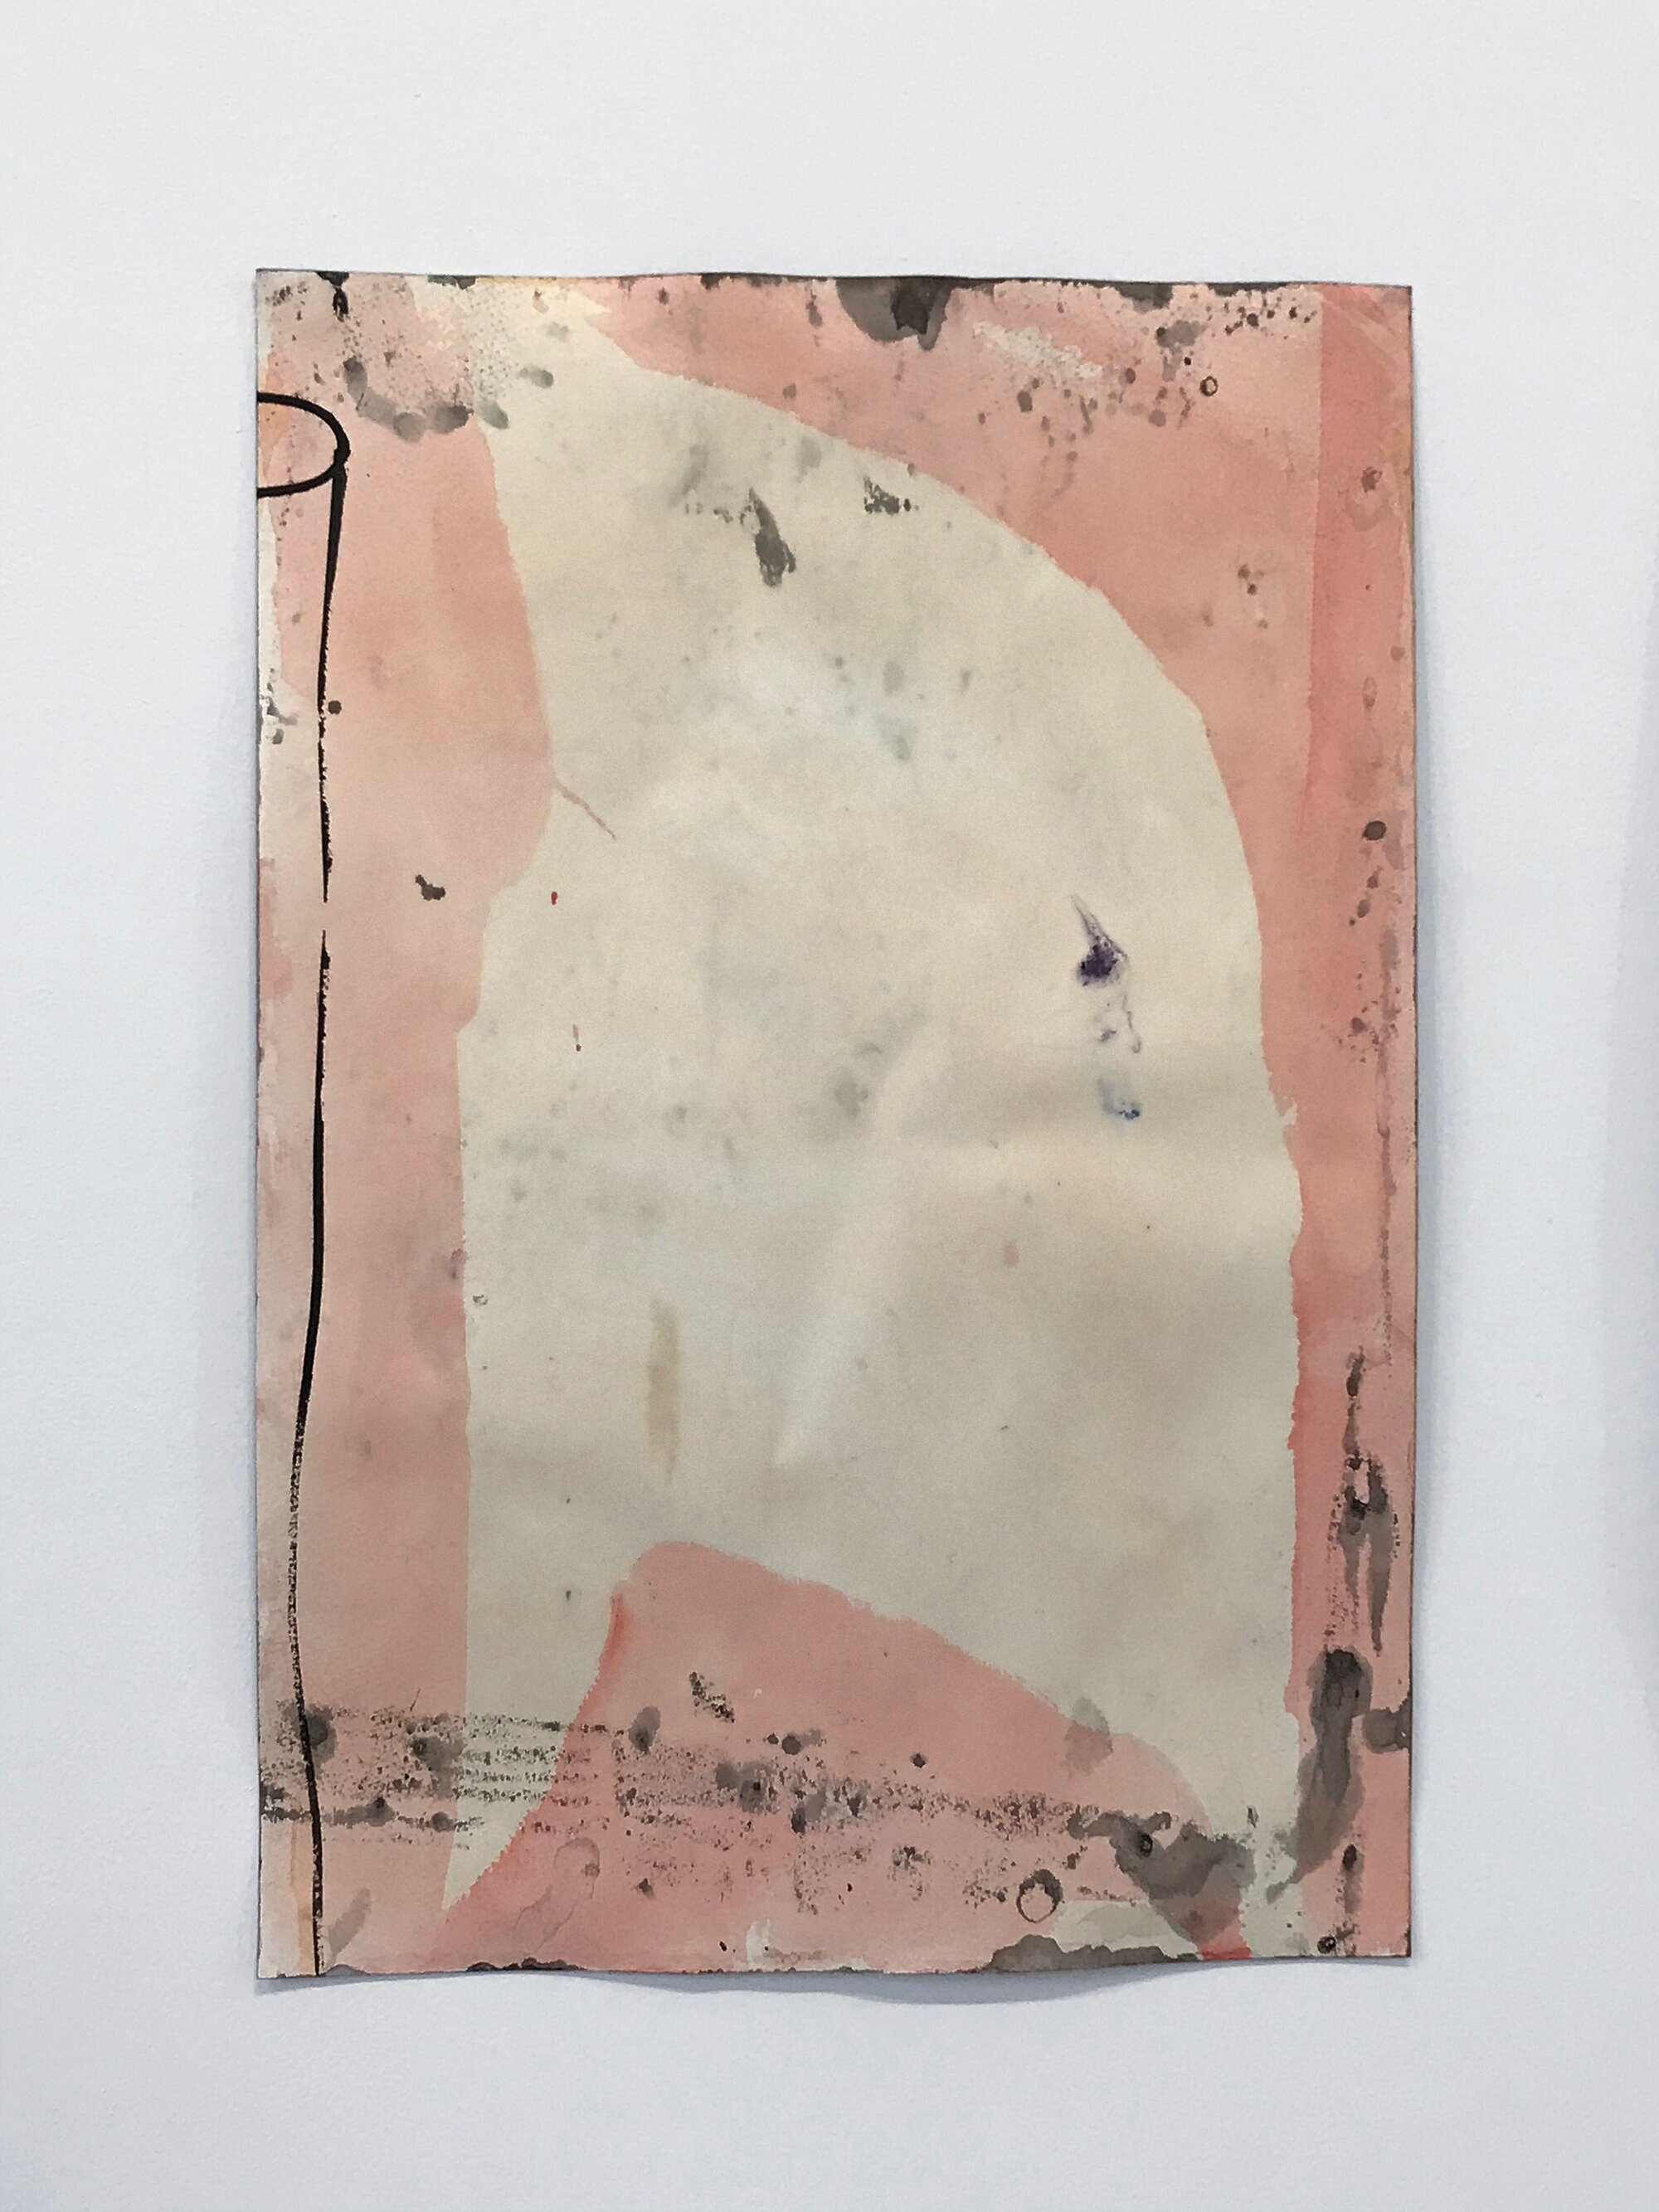 Vincent Hawkins, 'Wing 1' 2019, 56x38cm, ink & watercolour on paper.